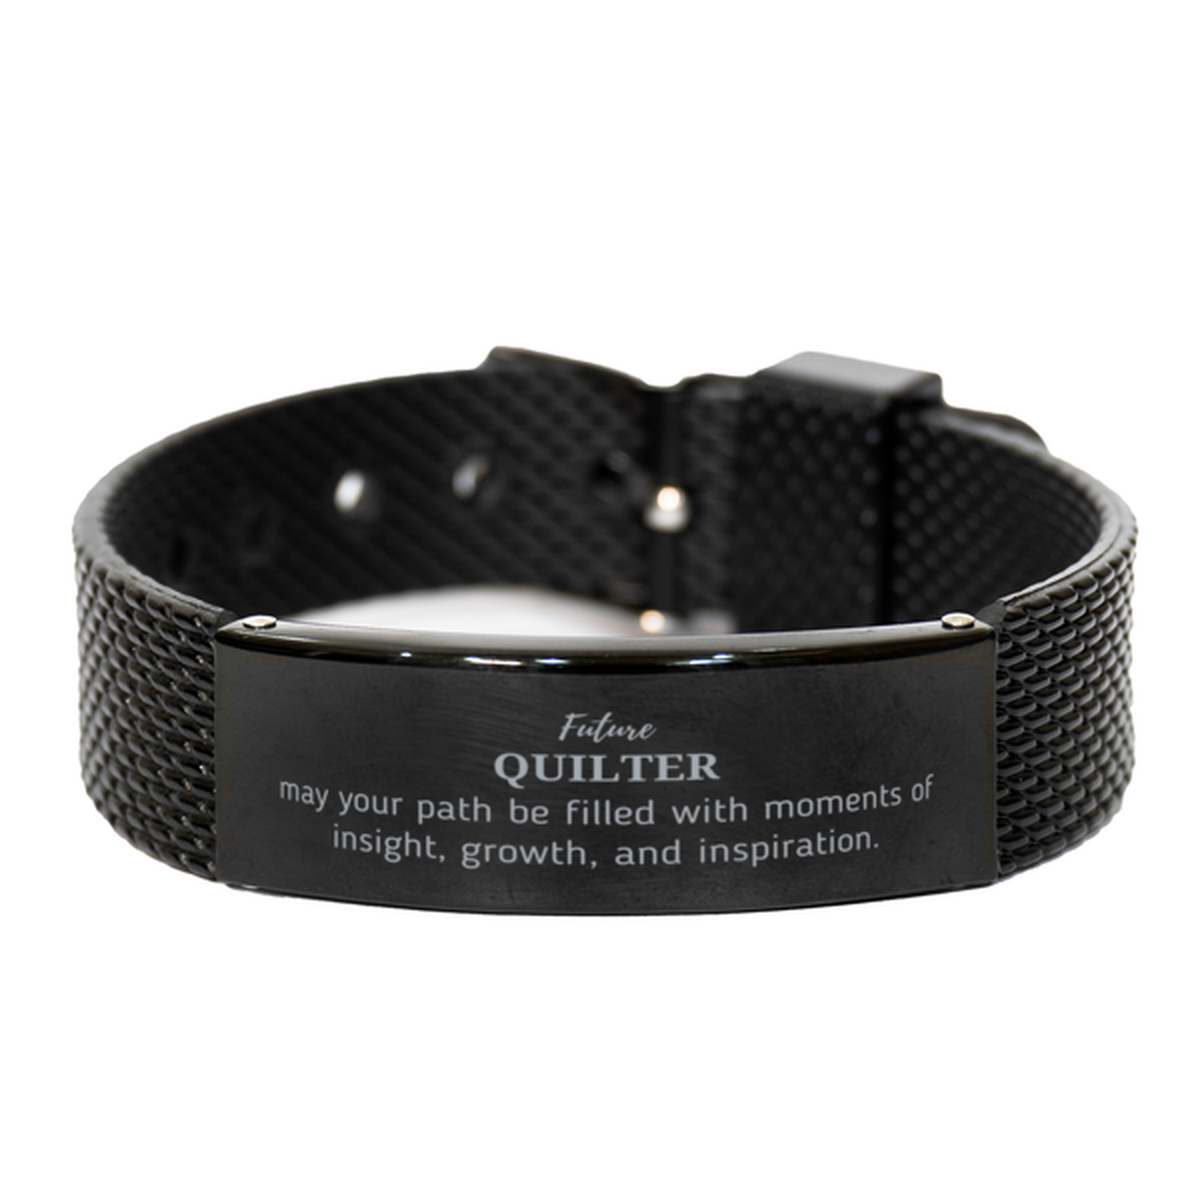 Future Quilter Gifts, May your path be filled with moments of insight, Graduation Gifts for New Quilter, Christmas Unique Black Shark Mesh Bracelet For Men, Women, Friends